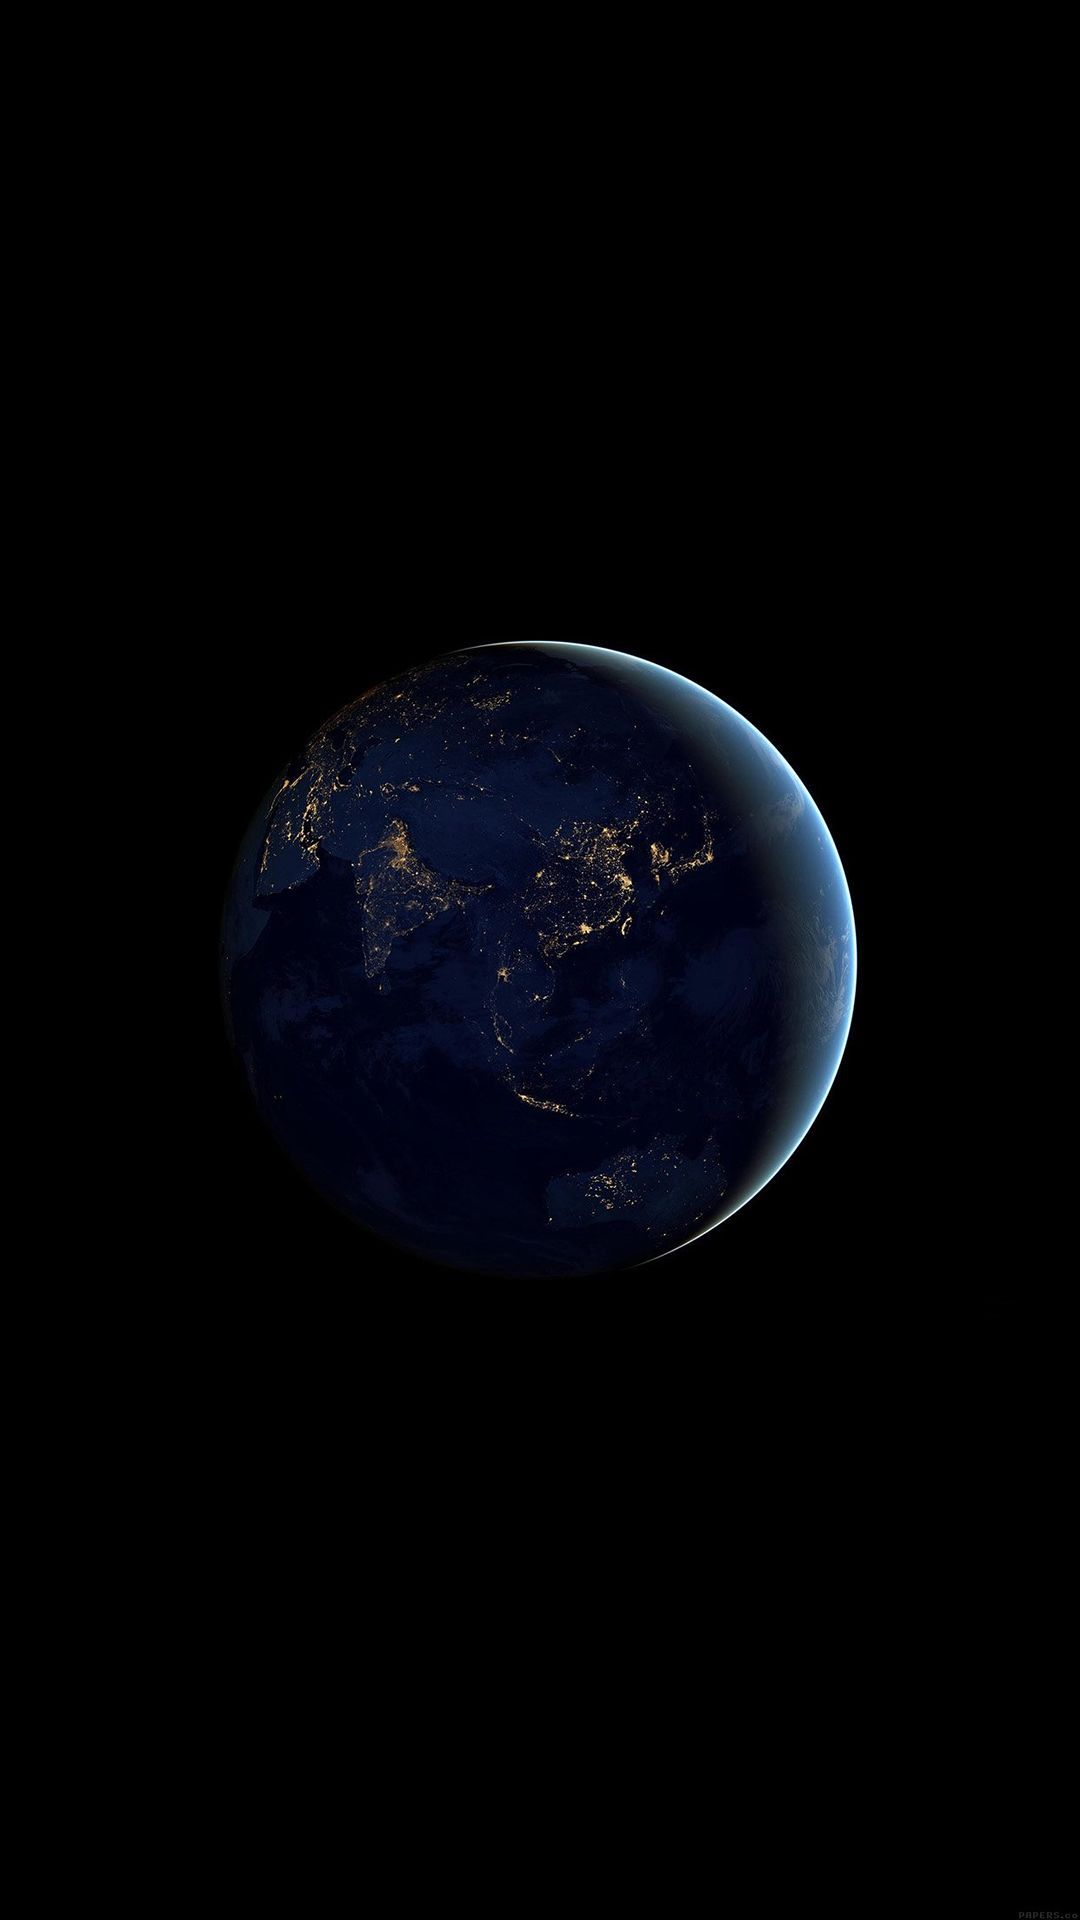 Asia At Night Earth Space Dark iPhone 6 Wallpaper Download. iPhone Wallpaper, iPad wallpaper On. Wallpaper earth, Dark phone wallpaper, iPhone wallpaper earth